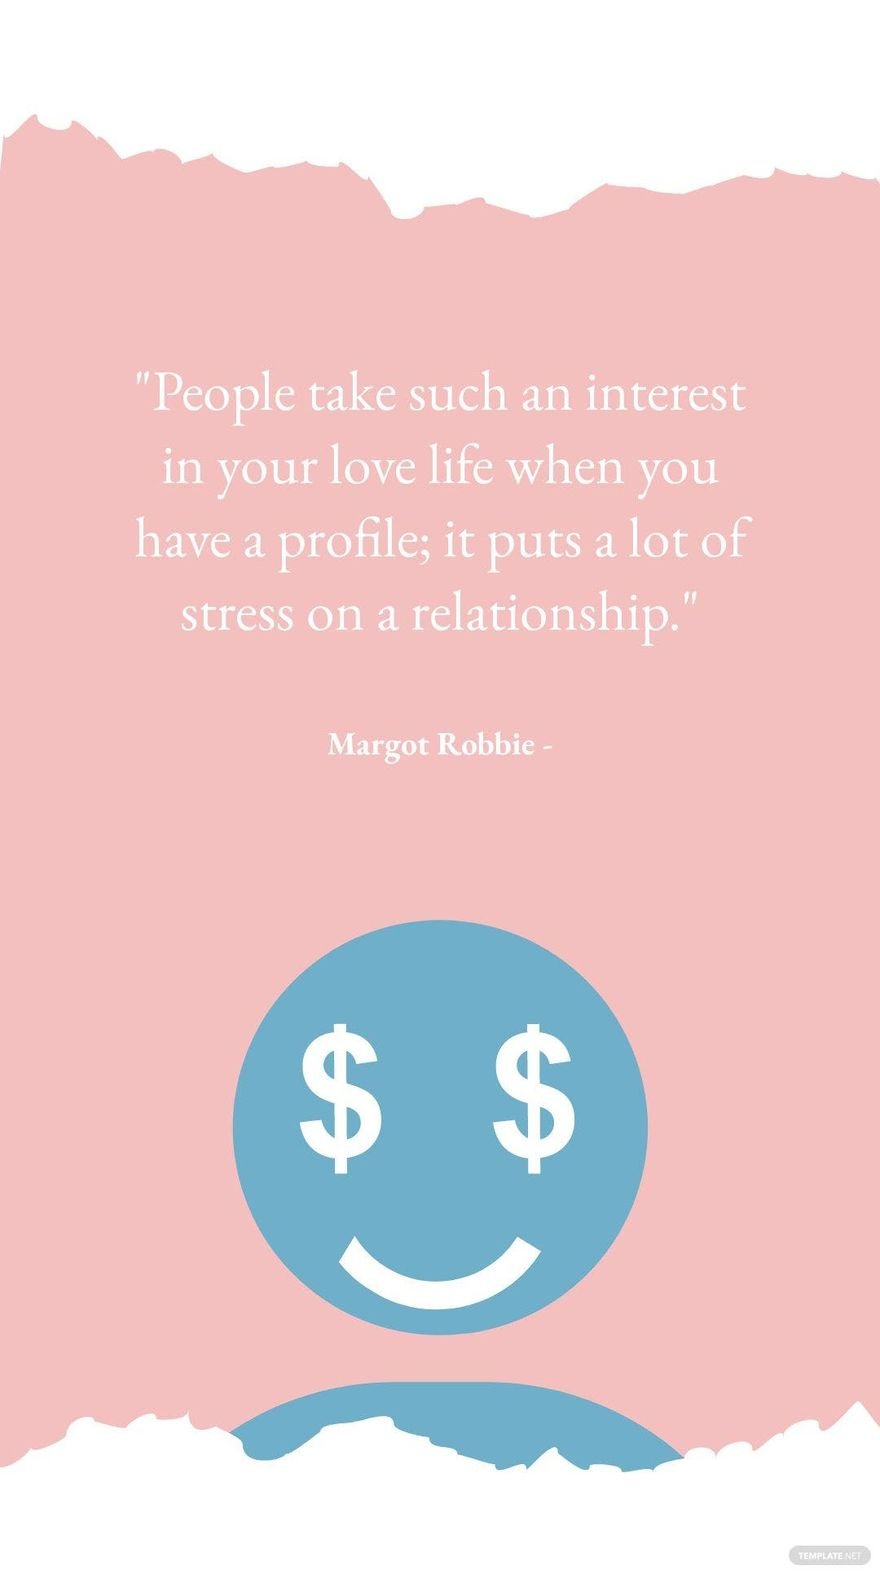 Margot Robbie  People take such an interest in your love life when you have a profile it puts a lot of stress on a relationship